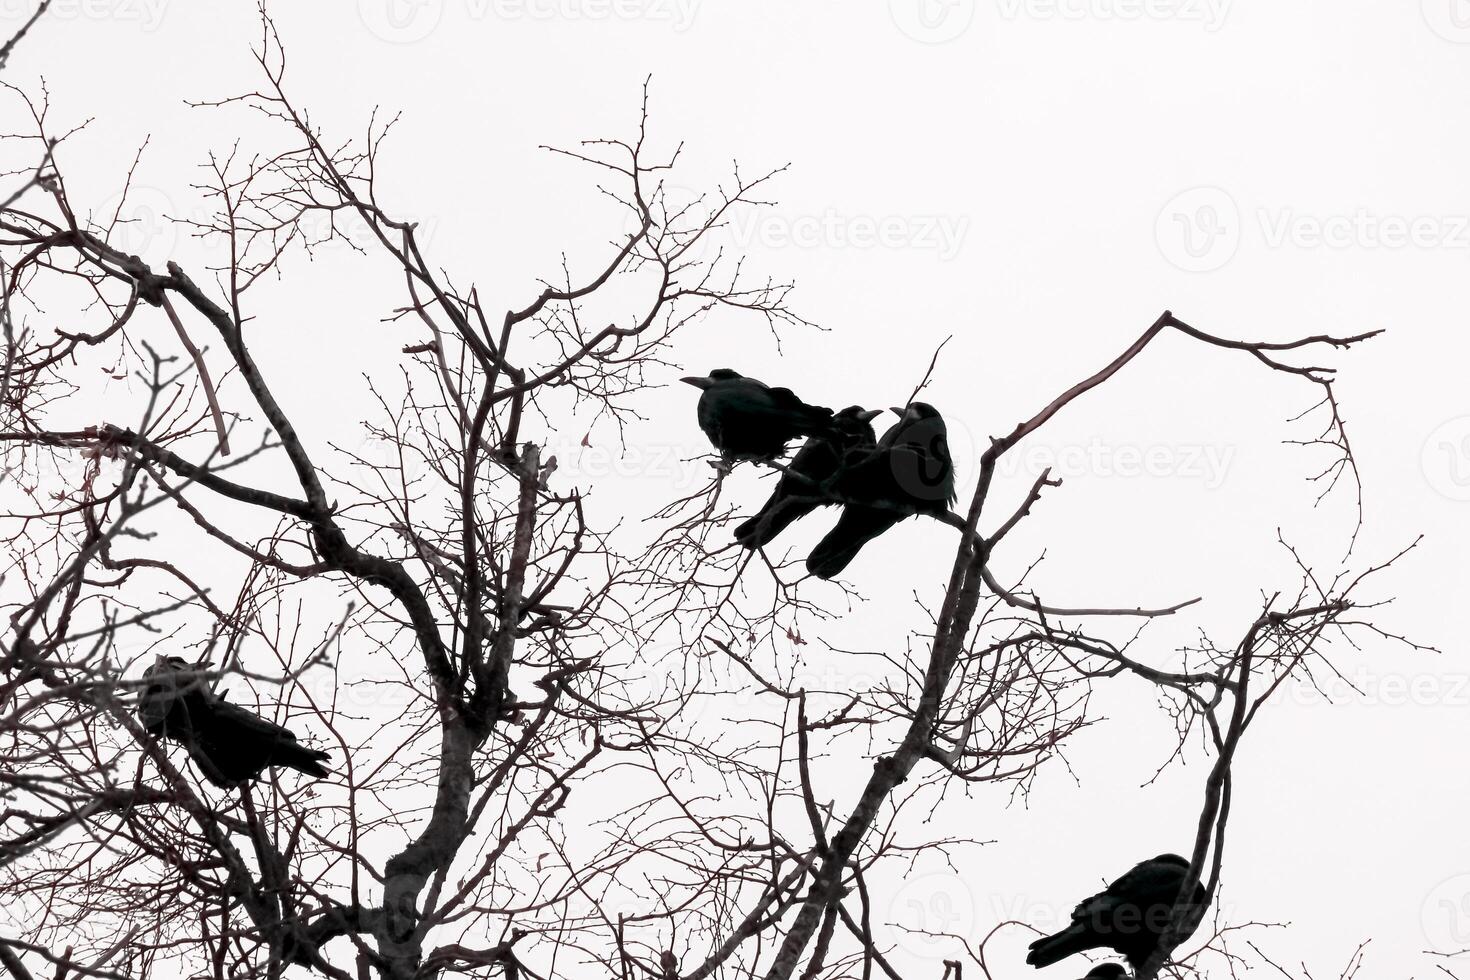 Stark black branches against pristine winter white sky, with a crow family perched, creating a scene of nature's beauty and connection photo